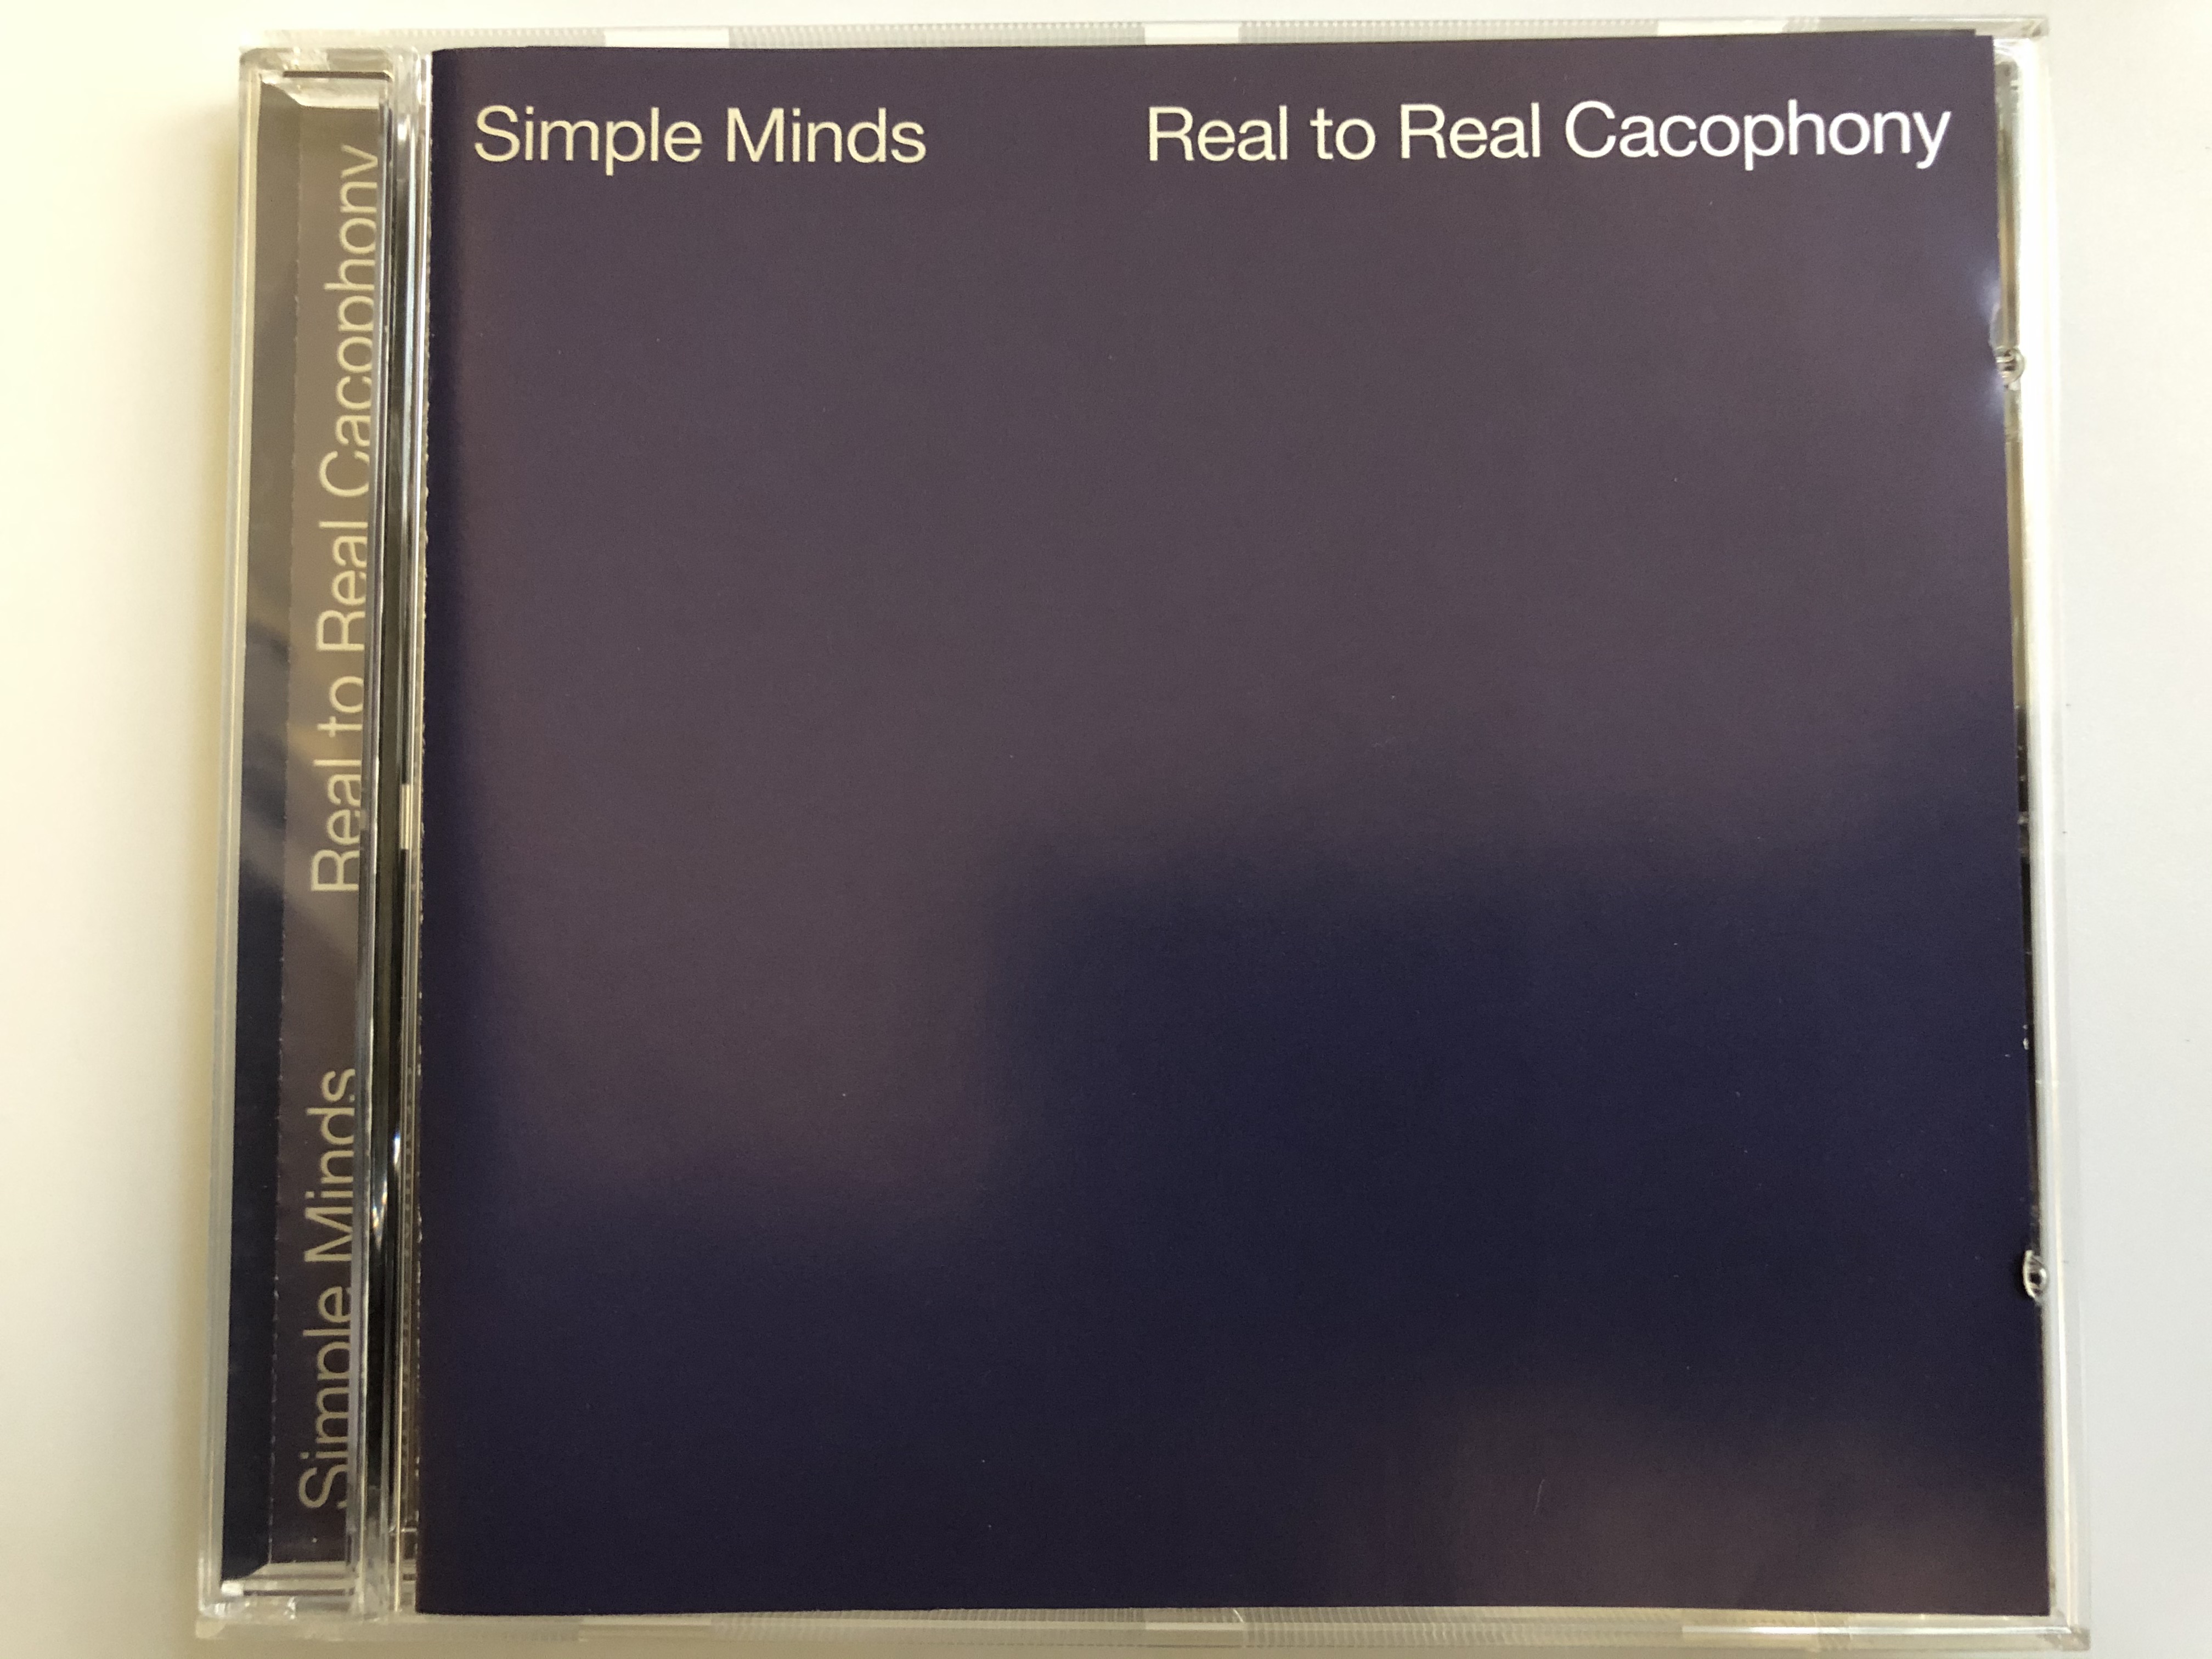 simple-minds-real-to-real-cacophony-disky-audio-cd-1996-vi-874782-1-.jpg